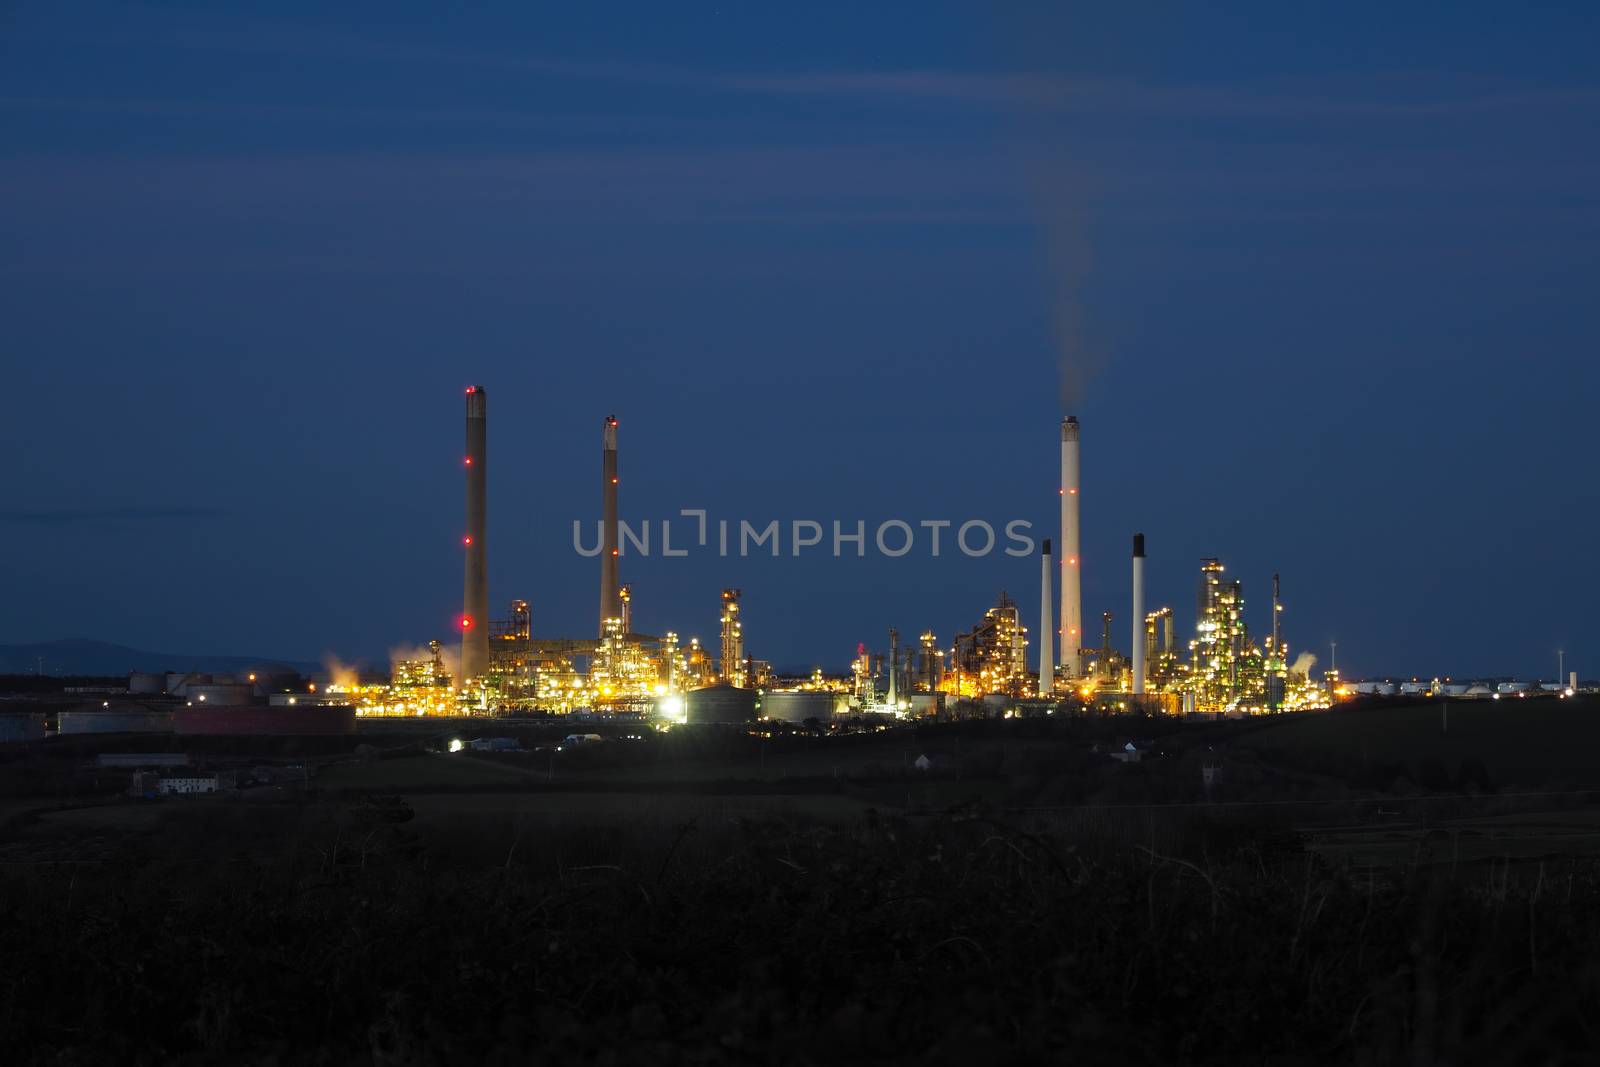 Pembroke oil refinery lit up at night with smoke rising from a chimney stack, Rhoscrowther on the Pembrokeshire coast, near Milford Haven, Wales, UK